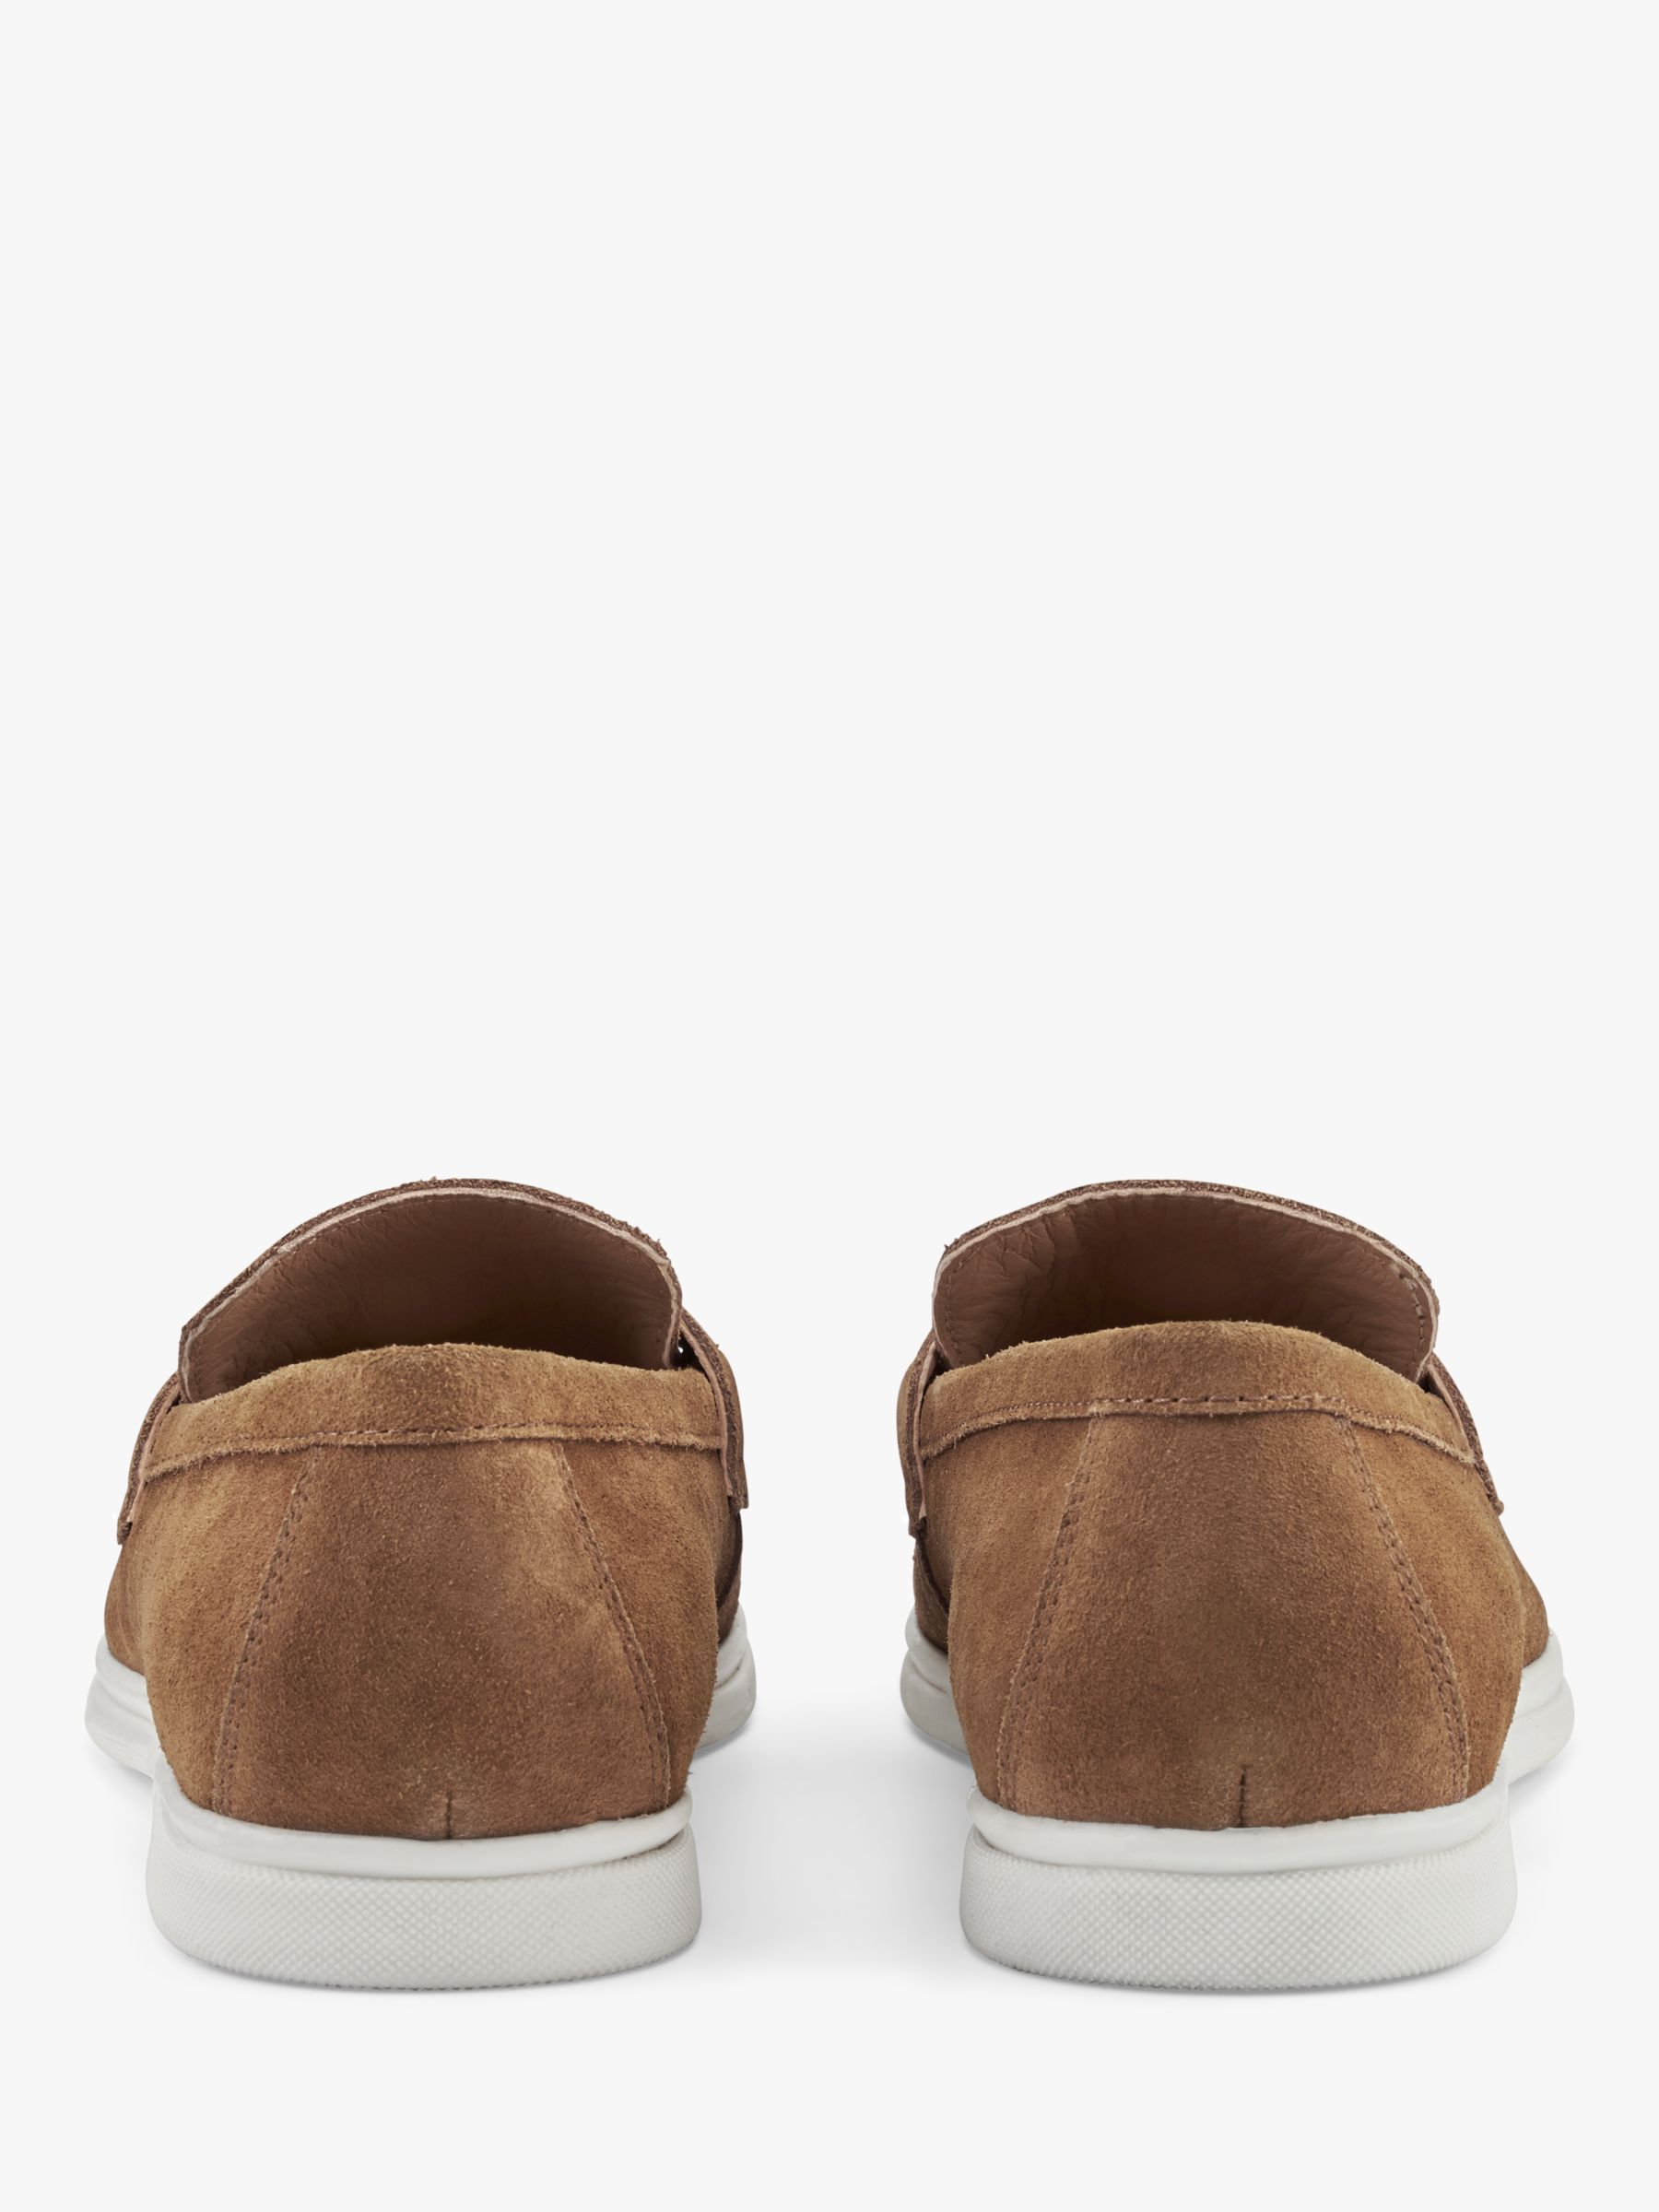 Buy Hotter River Premium Suede Loafers Online at johnlewis.com